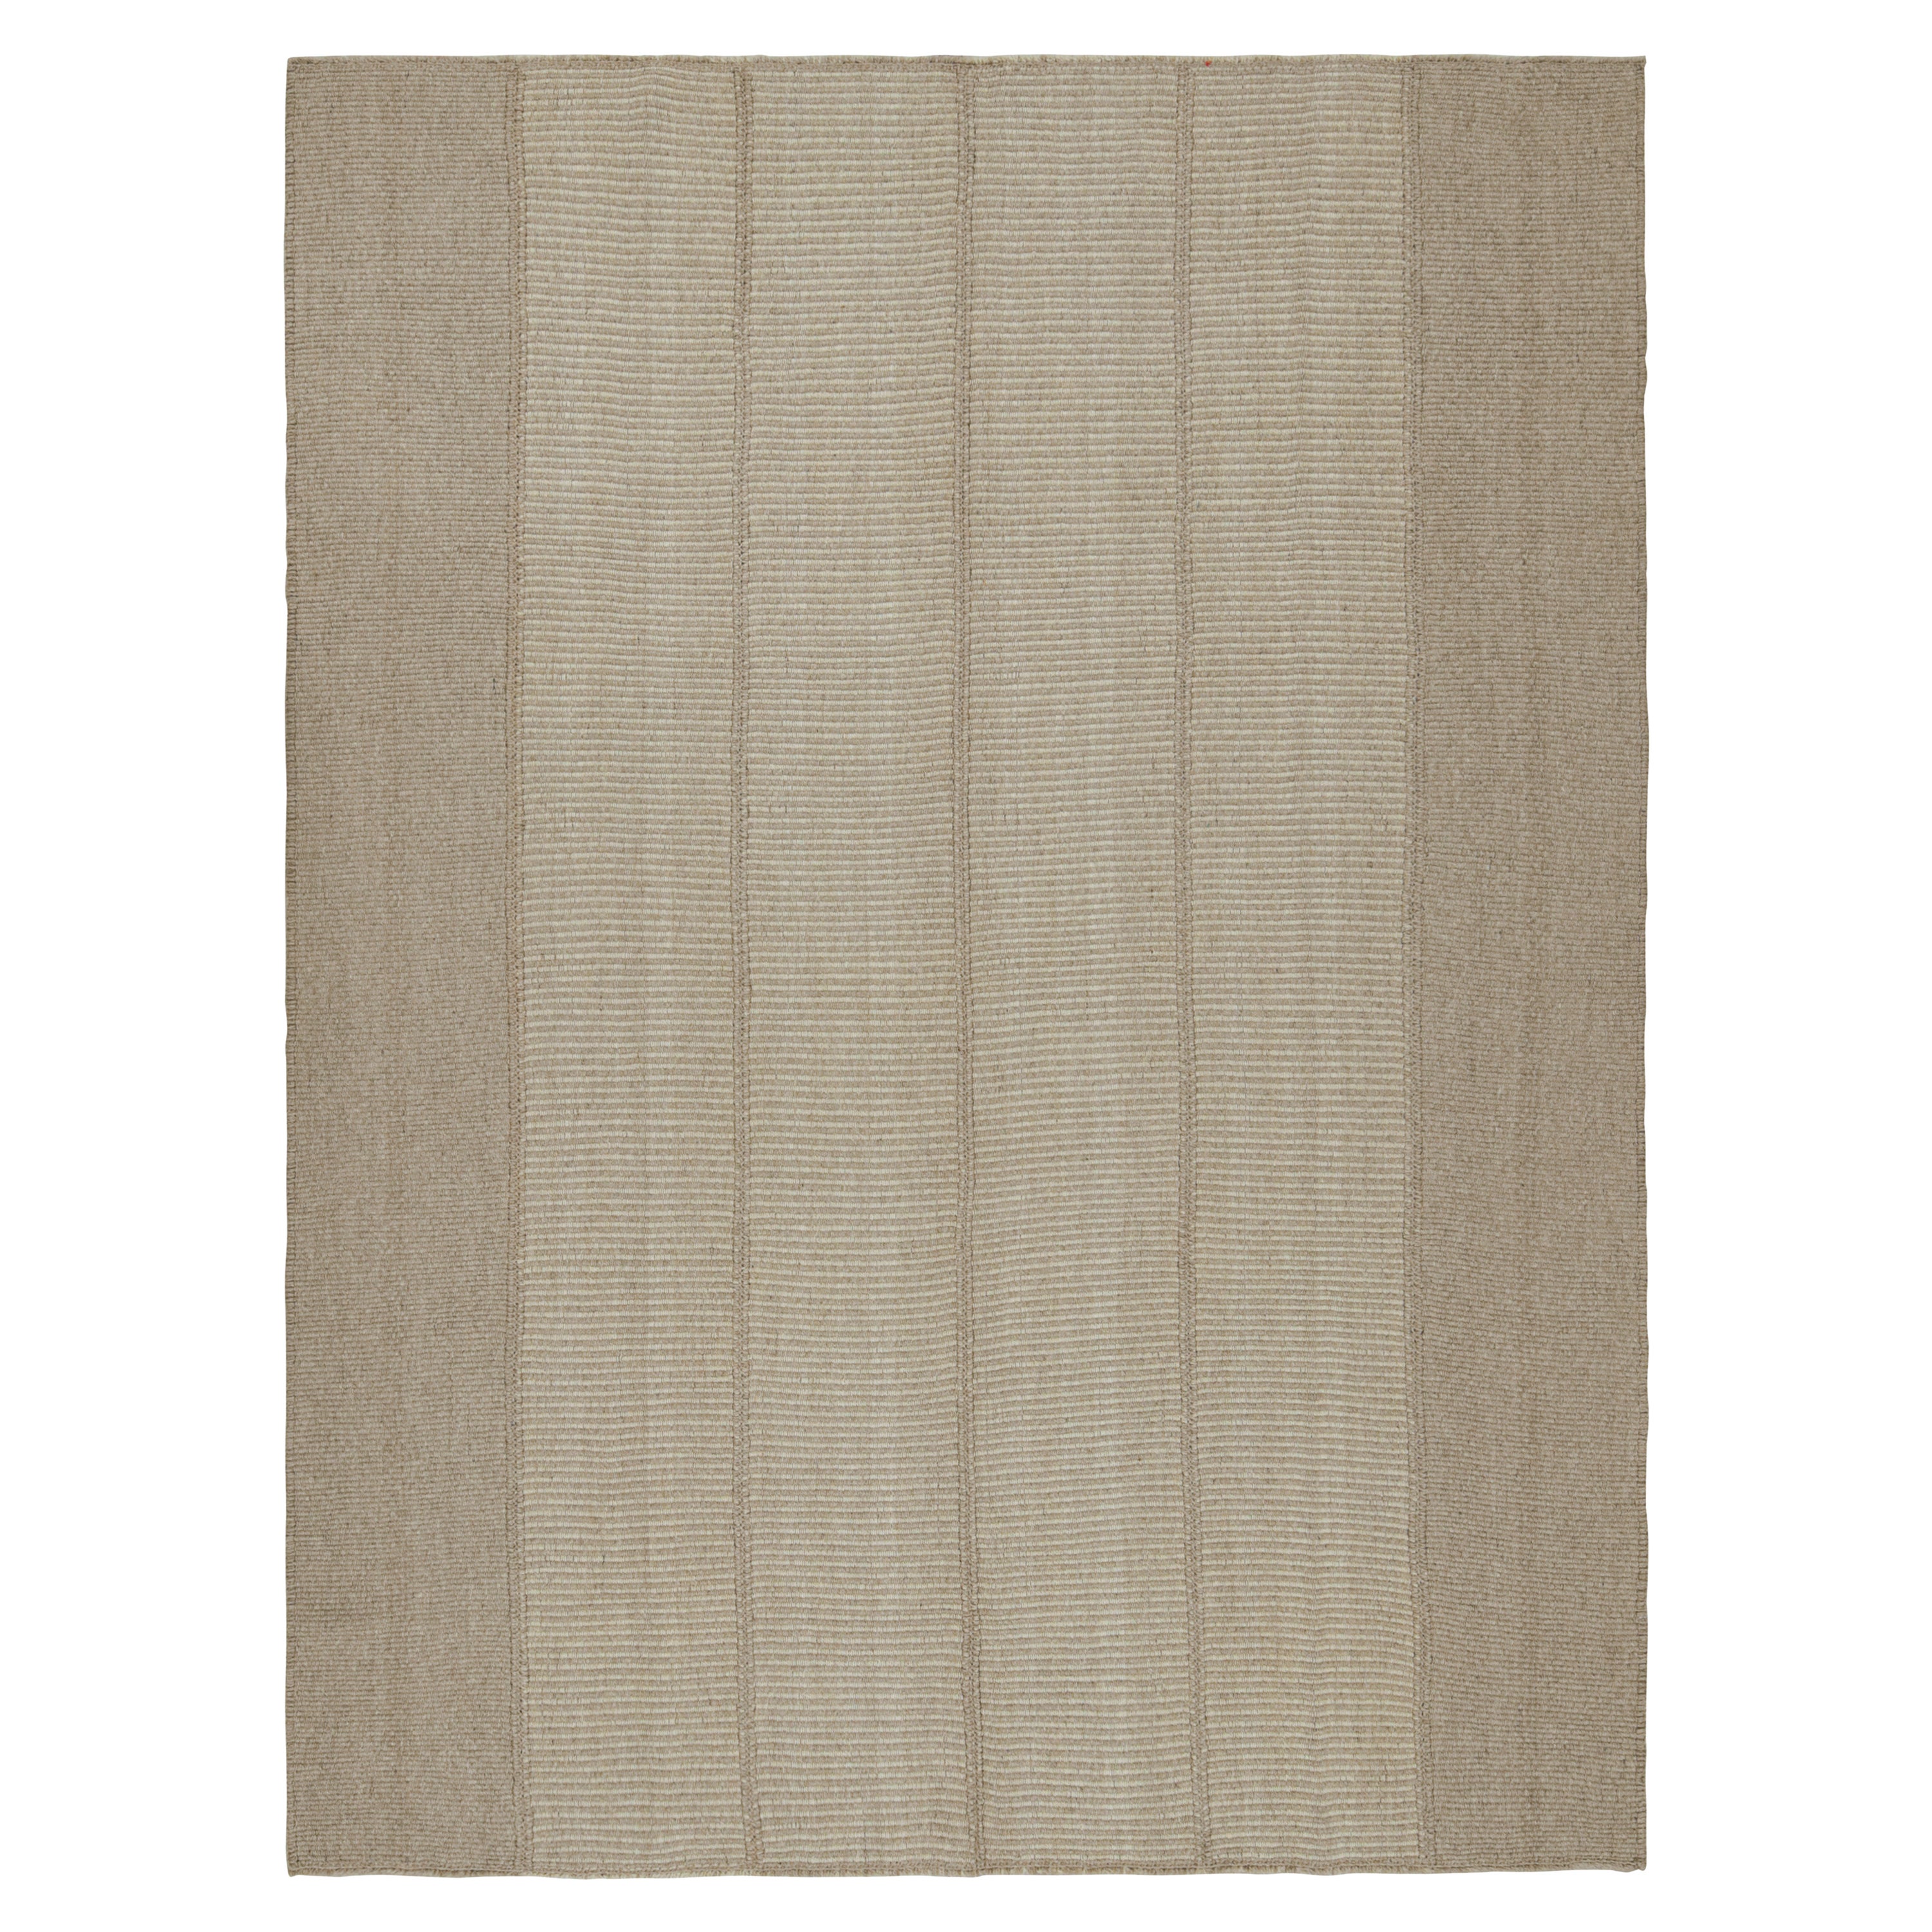 Rug & Kilim’s Contemporary Kilim with Light Beige-Brown Textural Stripes 